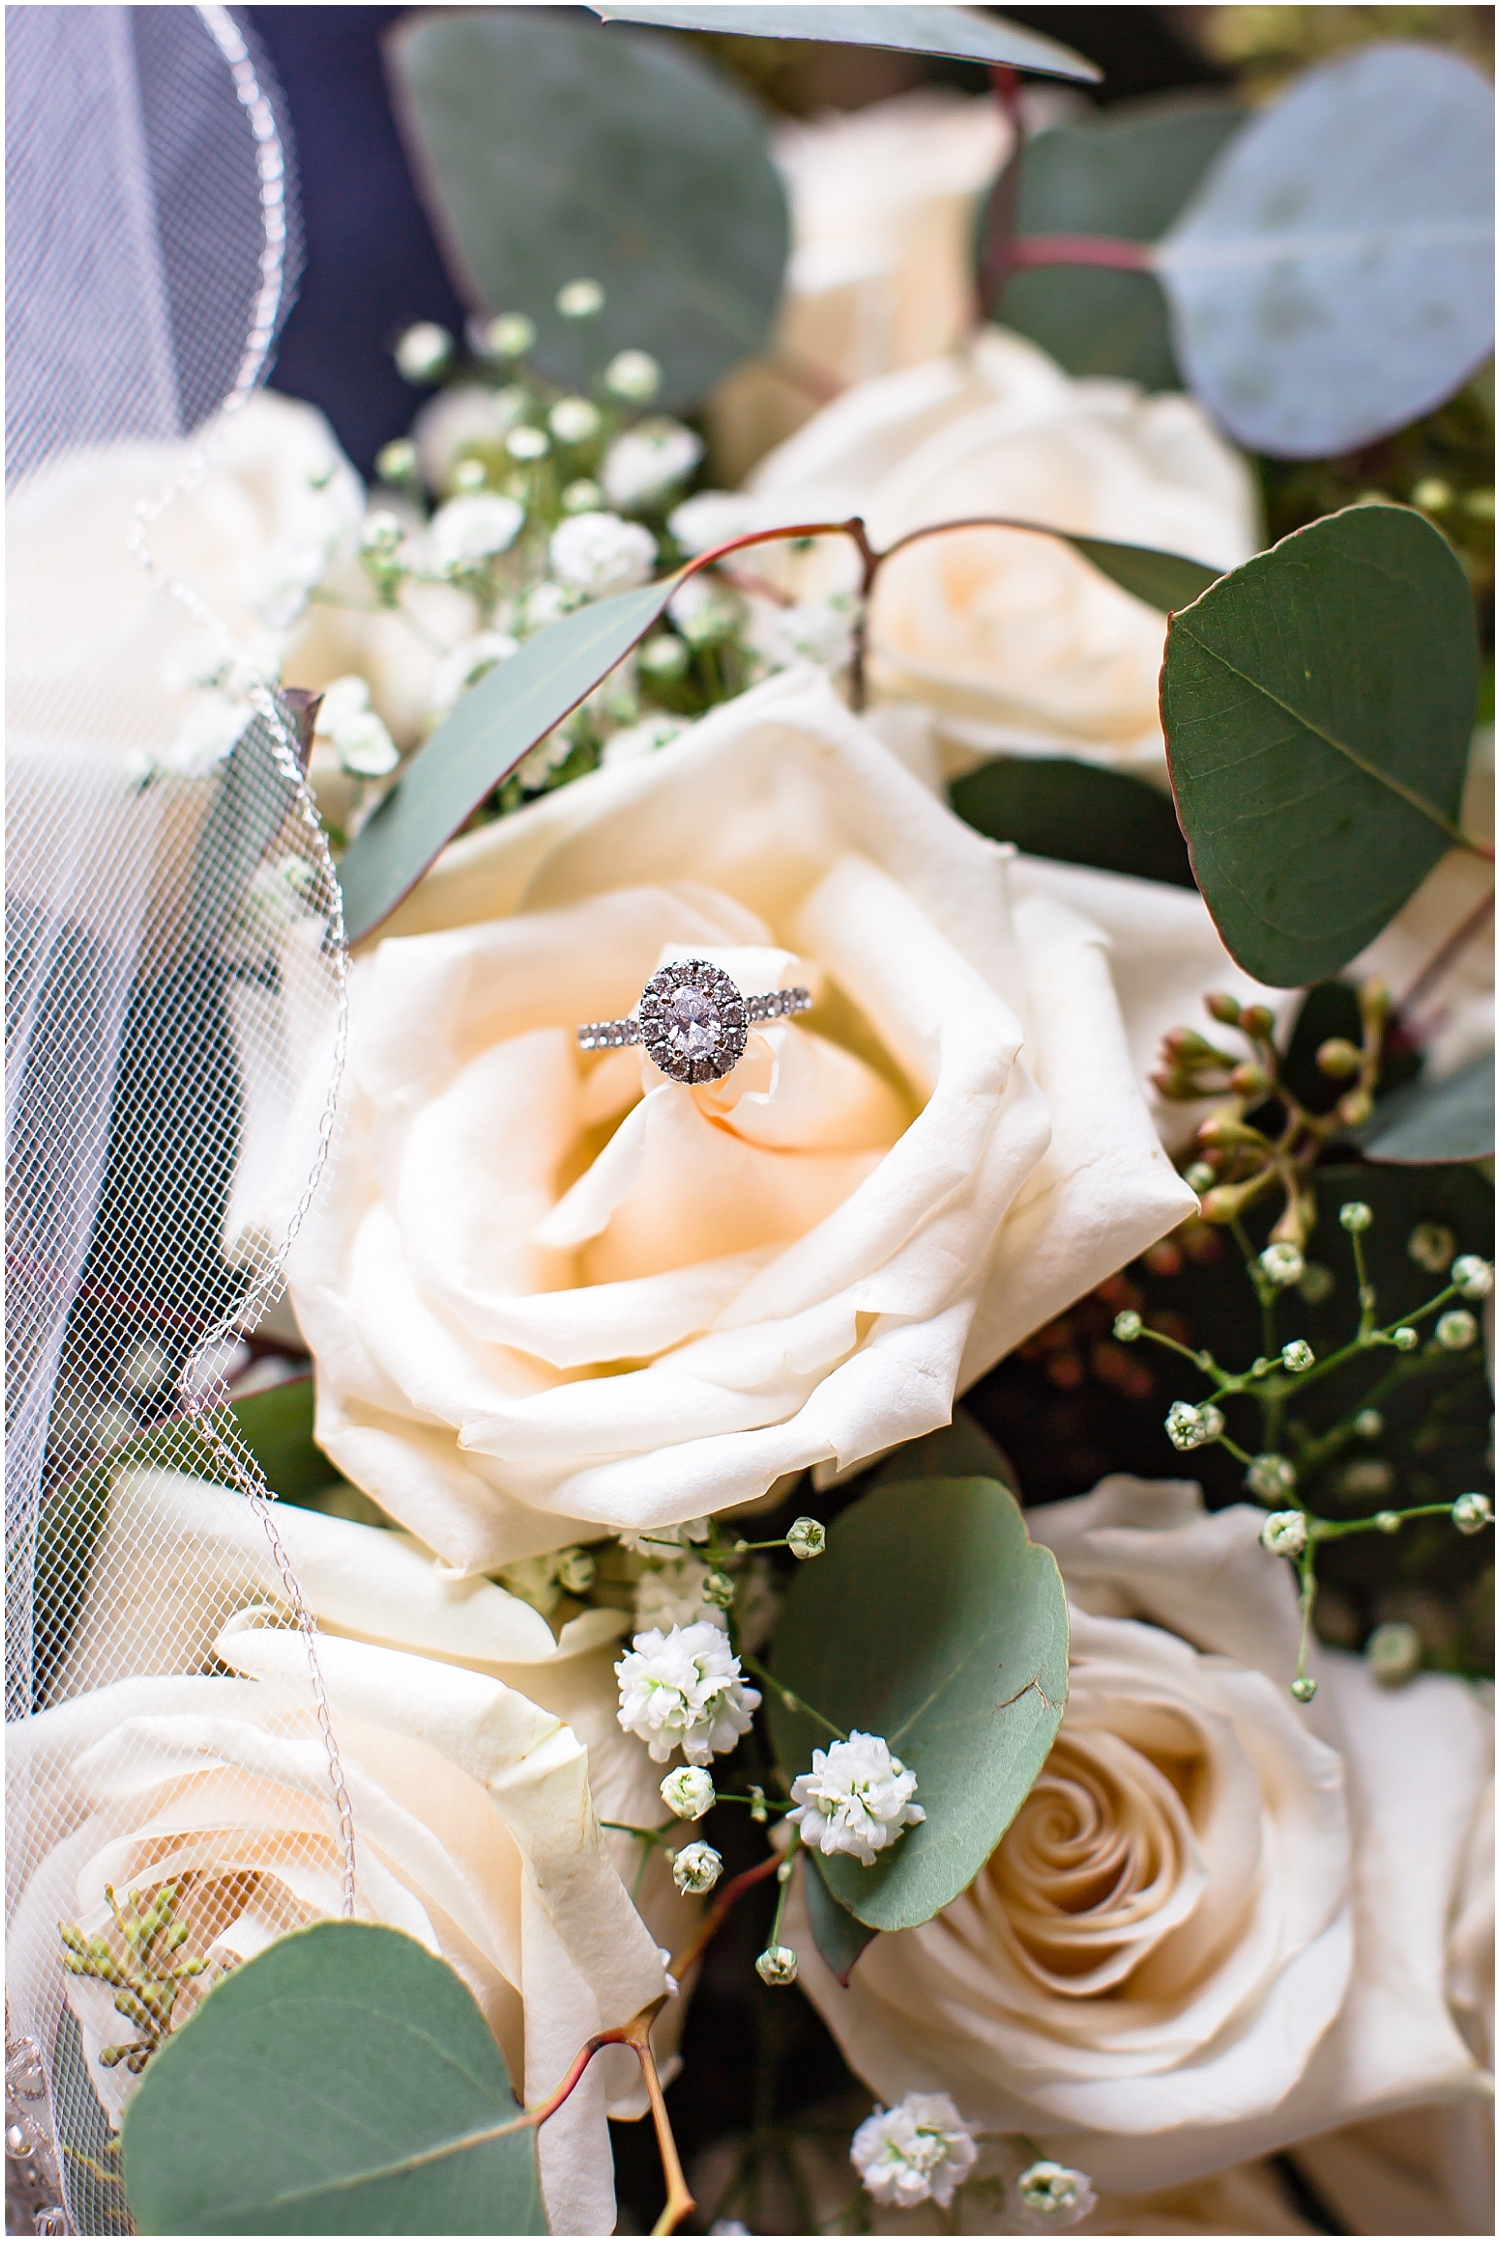  detail shot of the wedding bouquet and wedding rings 